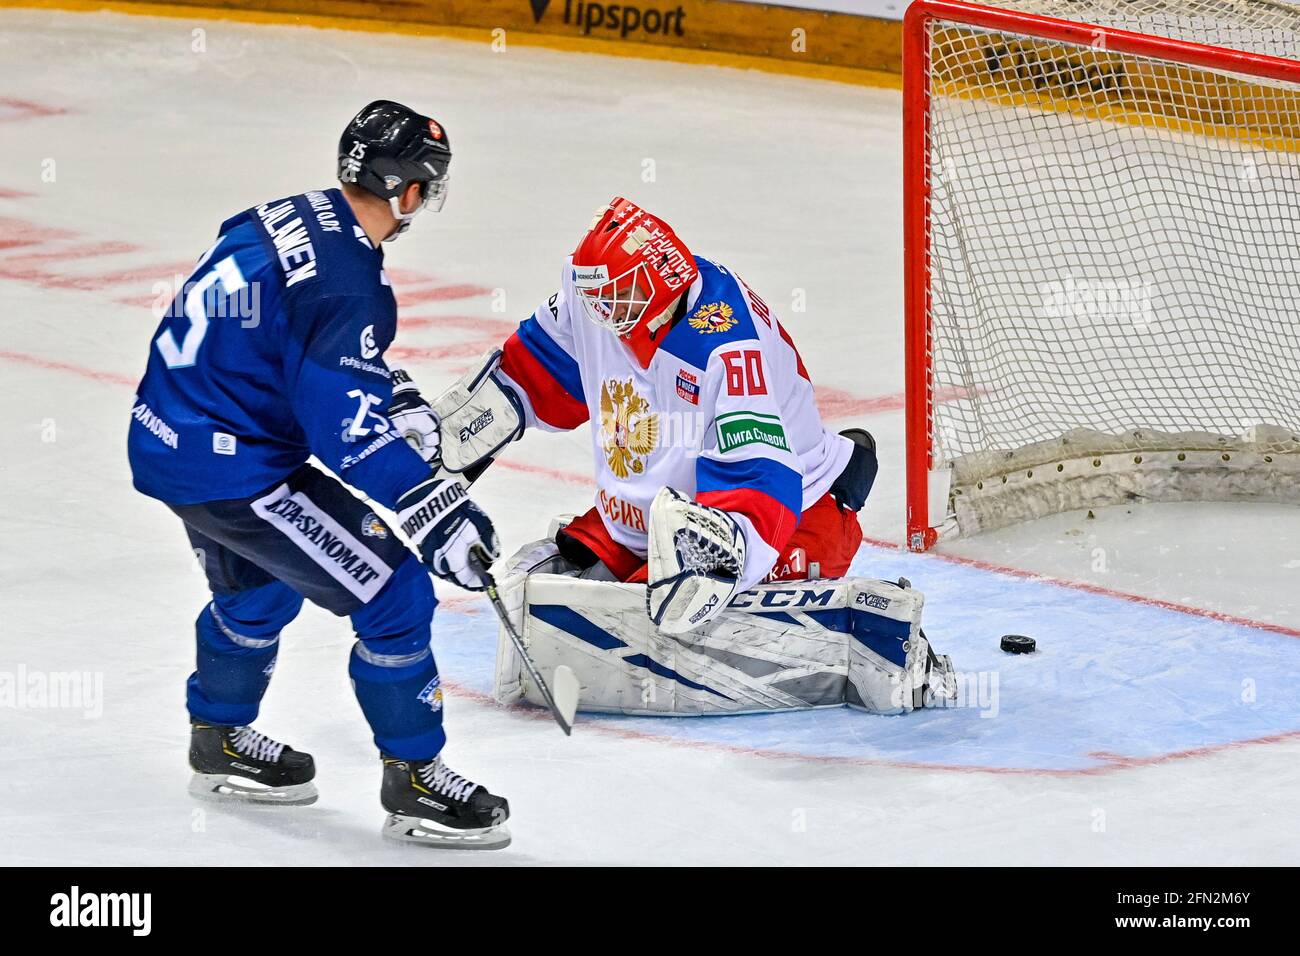 Prague, Czech Republic. 13th May, 2021. L-R Jere Karjalainen of Finland and Ivan Bocharov goalie of Russia in action during the Czech Hockey Games, Euro Hockey event Russia vs Finland